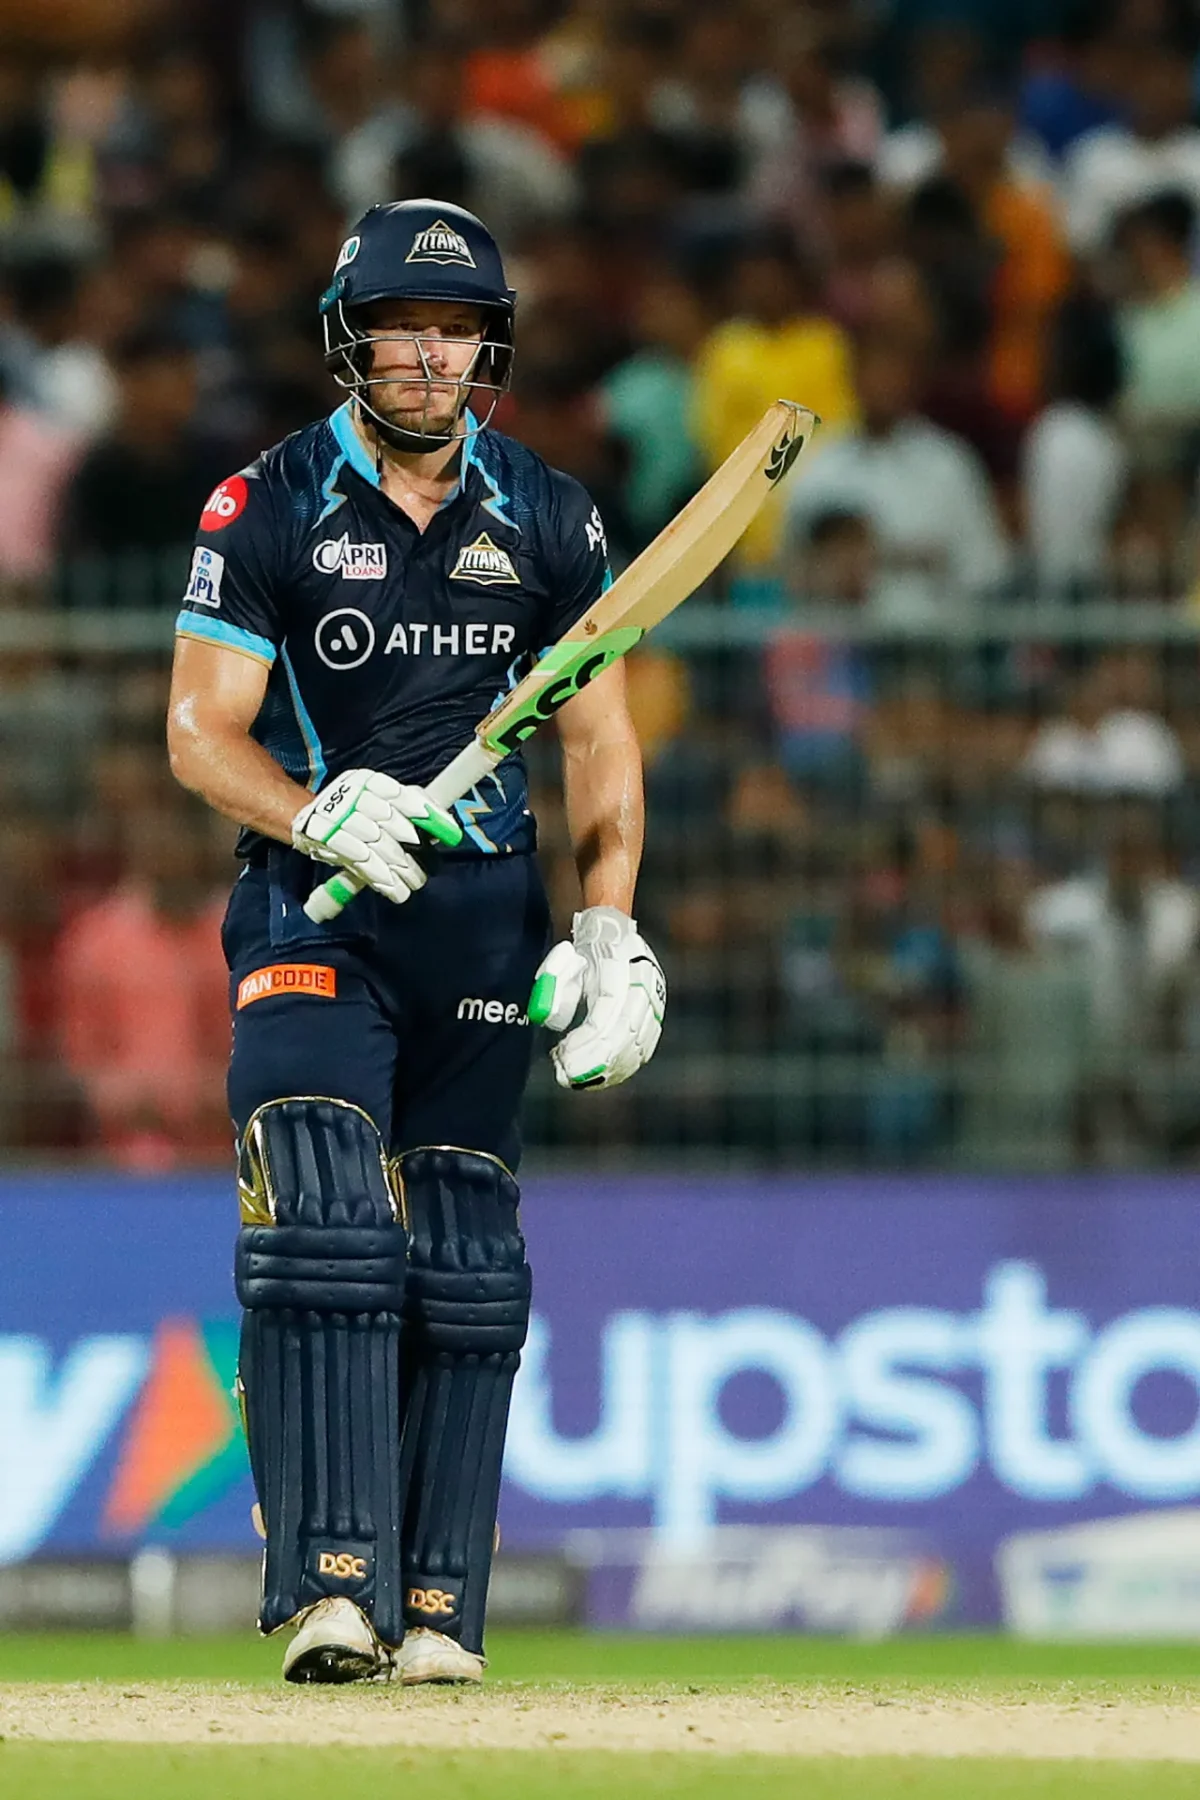 IPL 2022: It Is An Area I Had To Improve, In The Last 3-4 Years I Have Changed My Mindset – David Miller On Improving His Game Against Spin